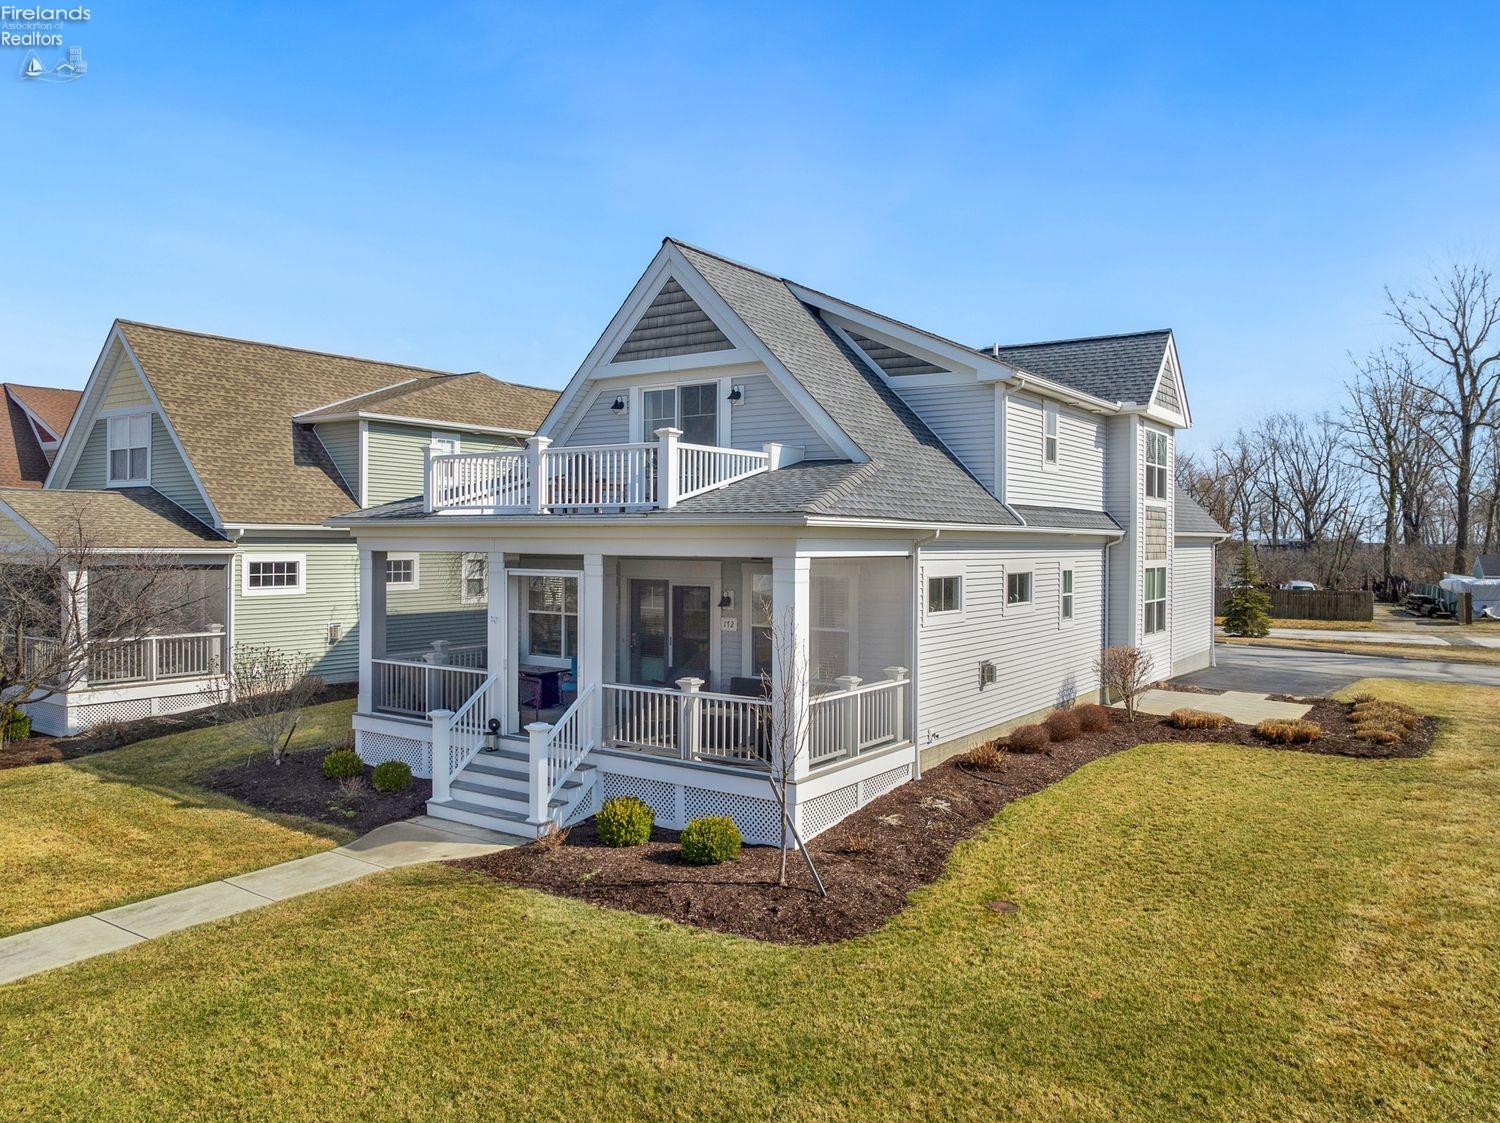 172 Cove Court Drive, Marblehead, OH 43440